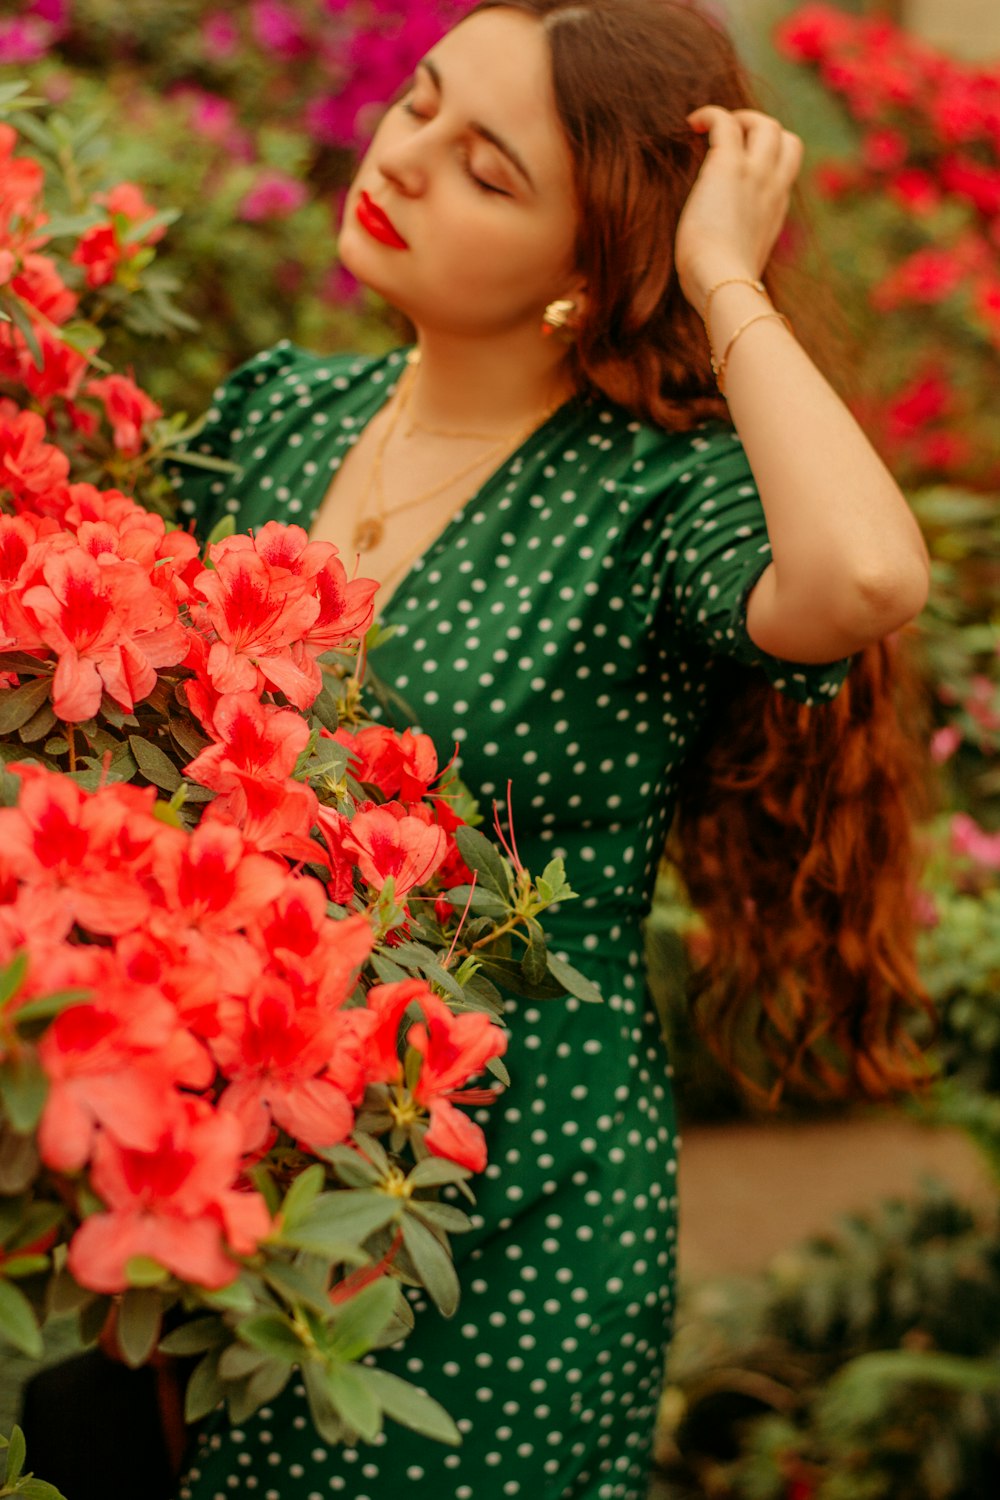 woman in green and white polka dot dress holding red flowers